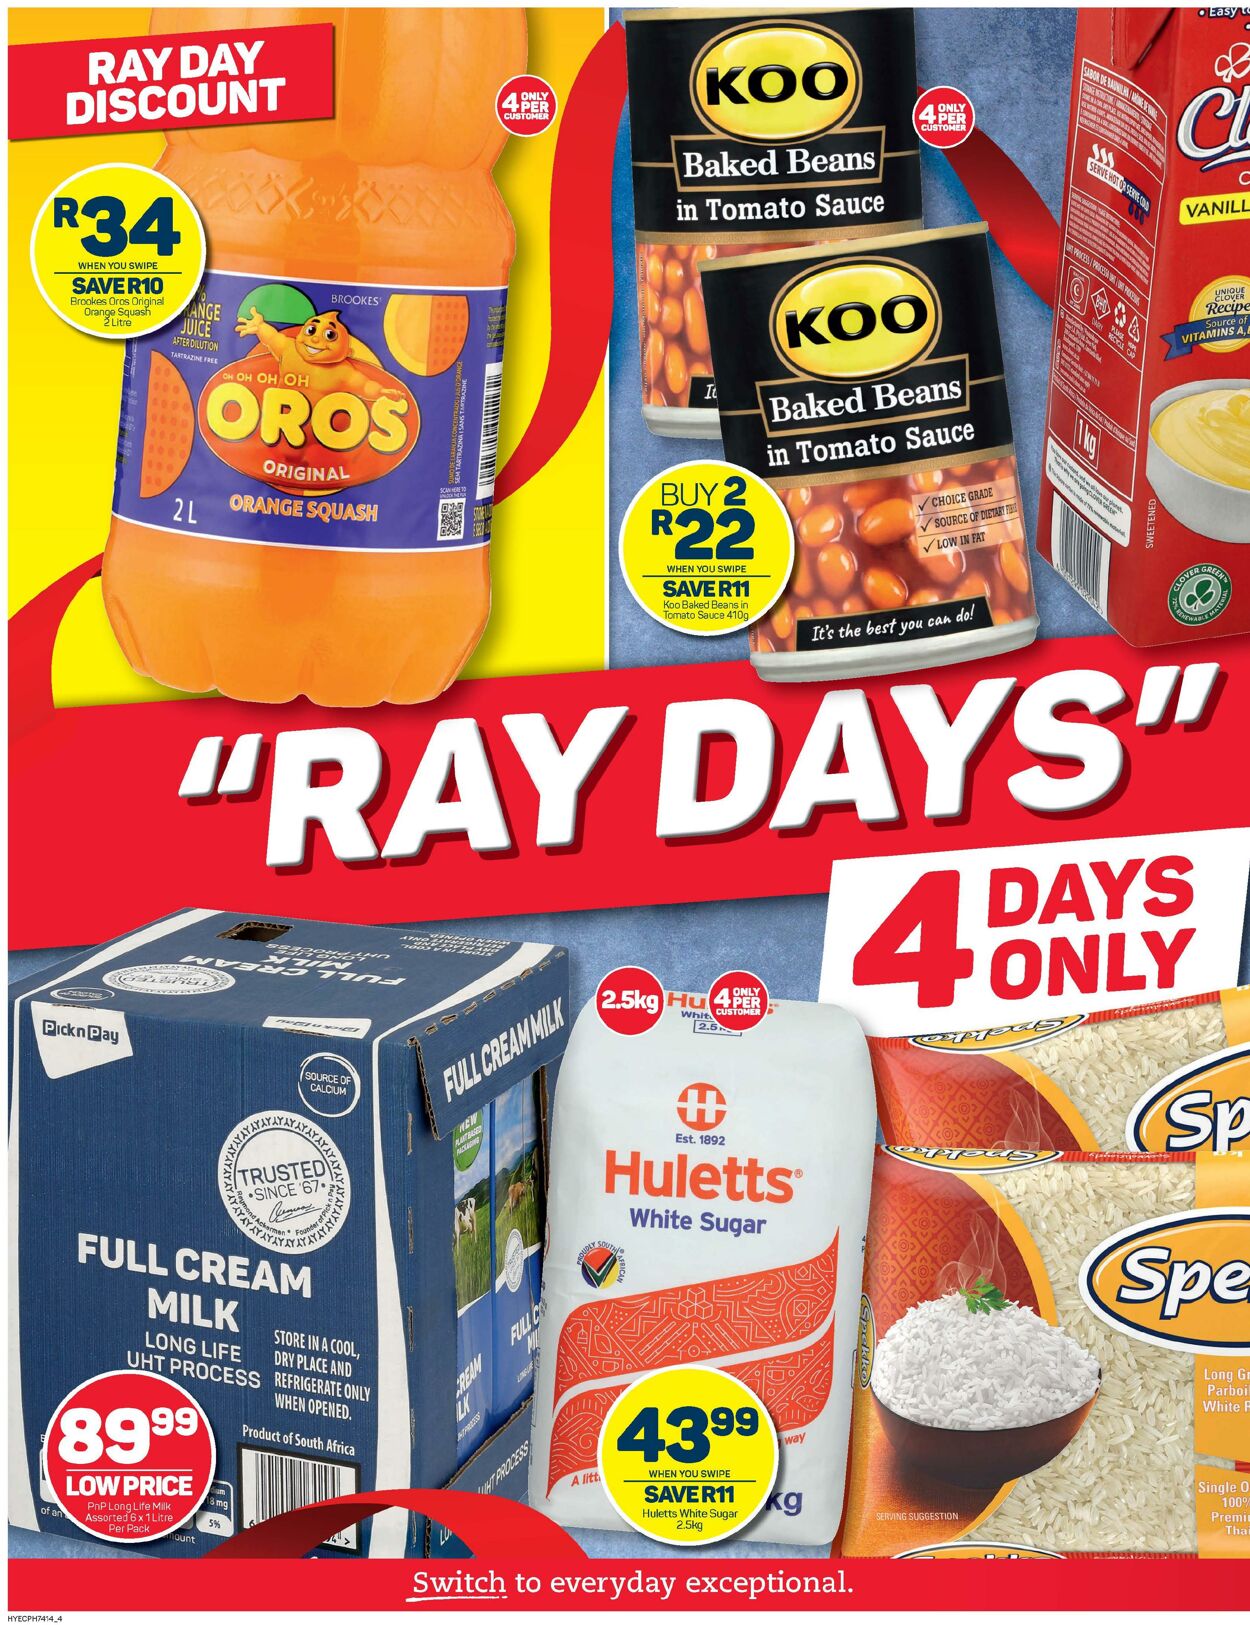 Special Pick n Pay 09.03.2023 - 12.03.2023